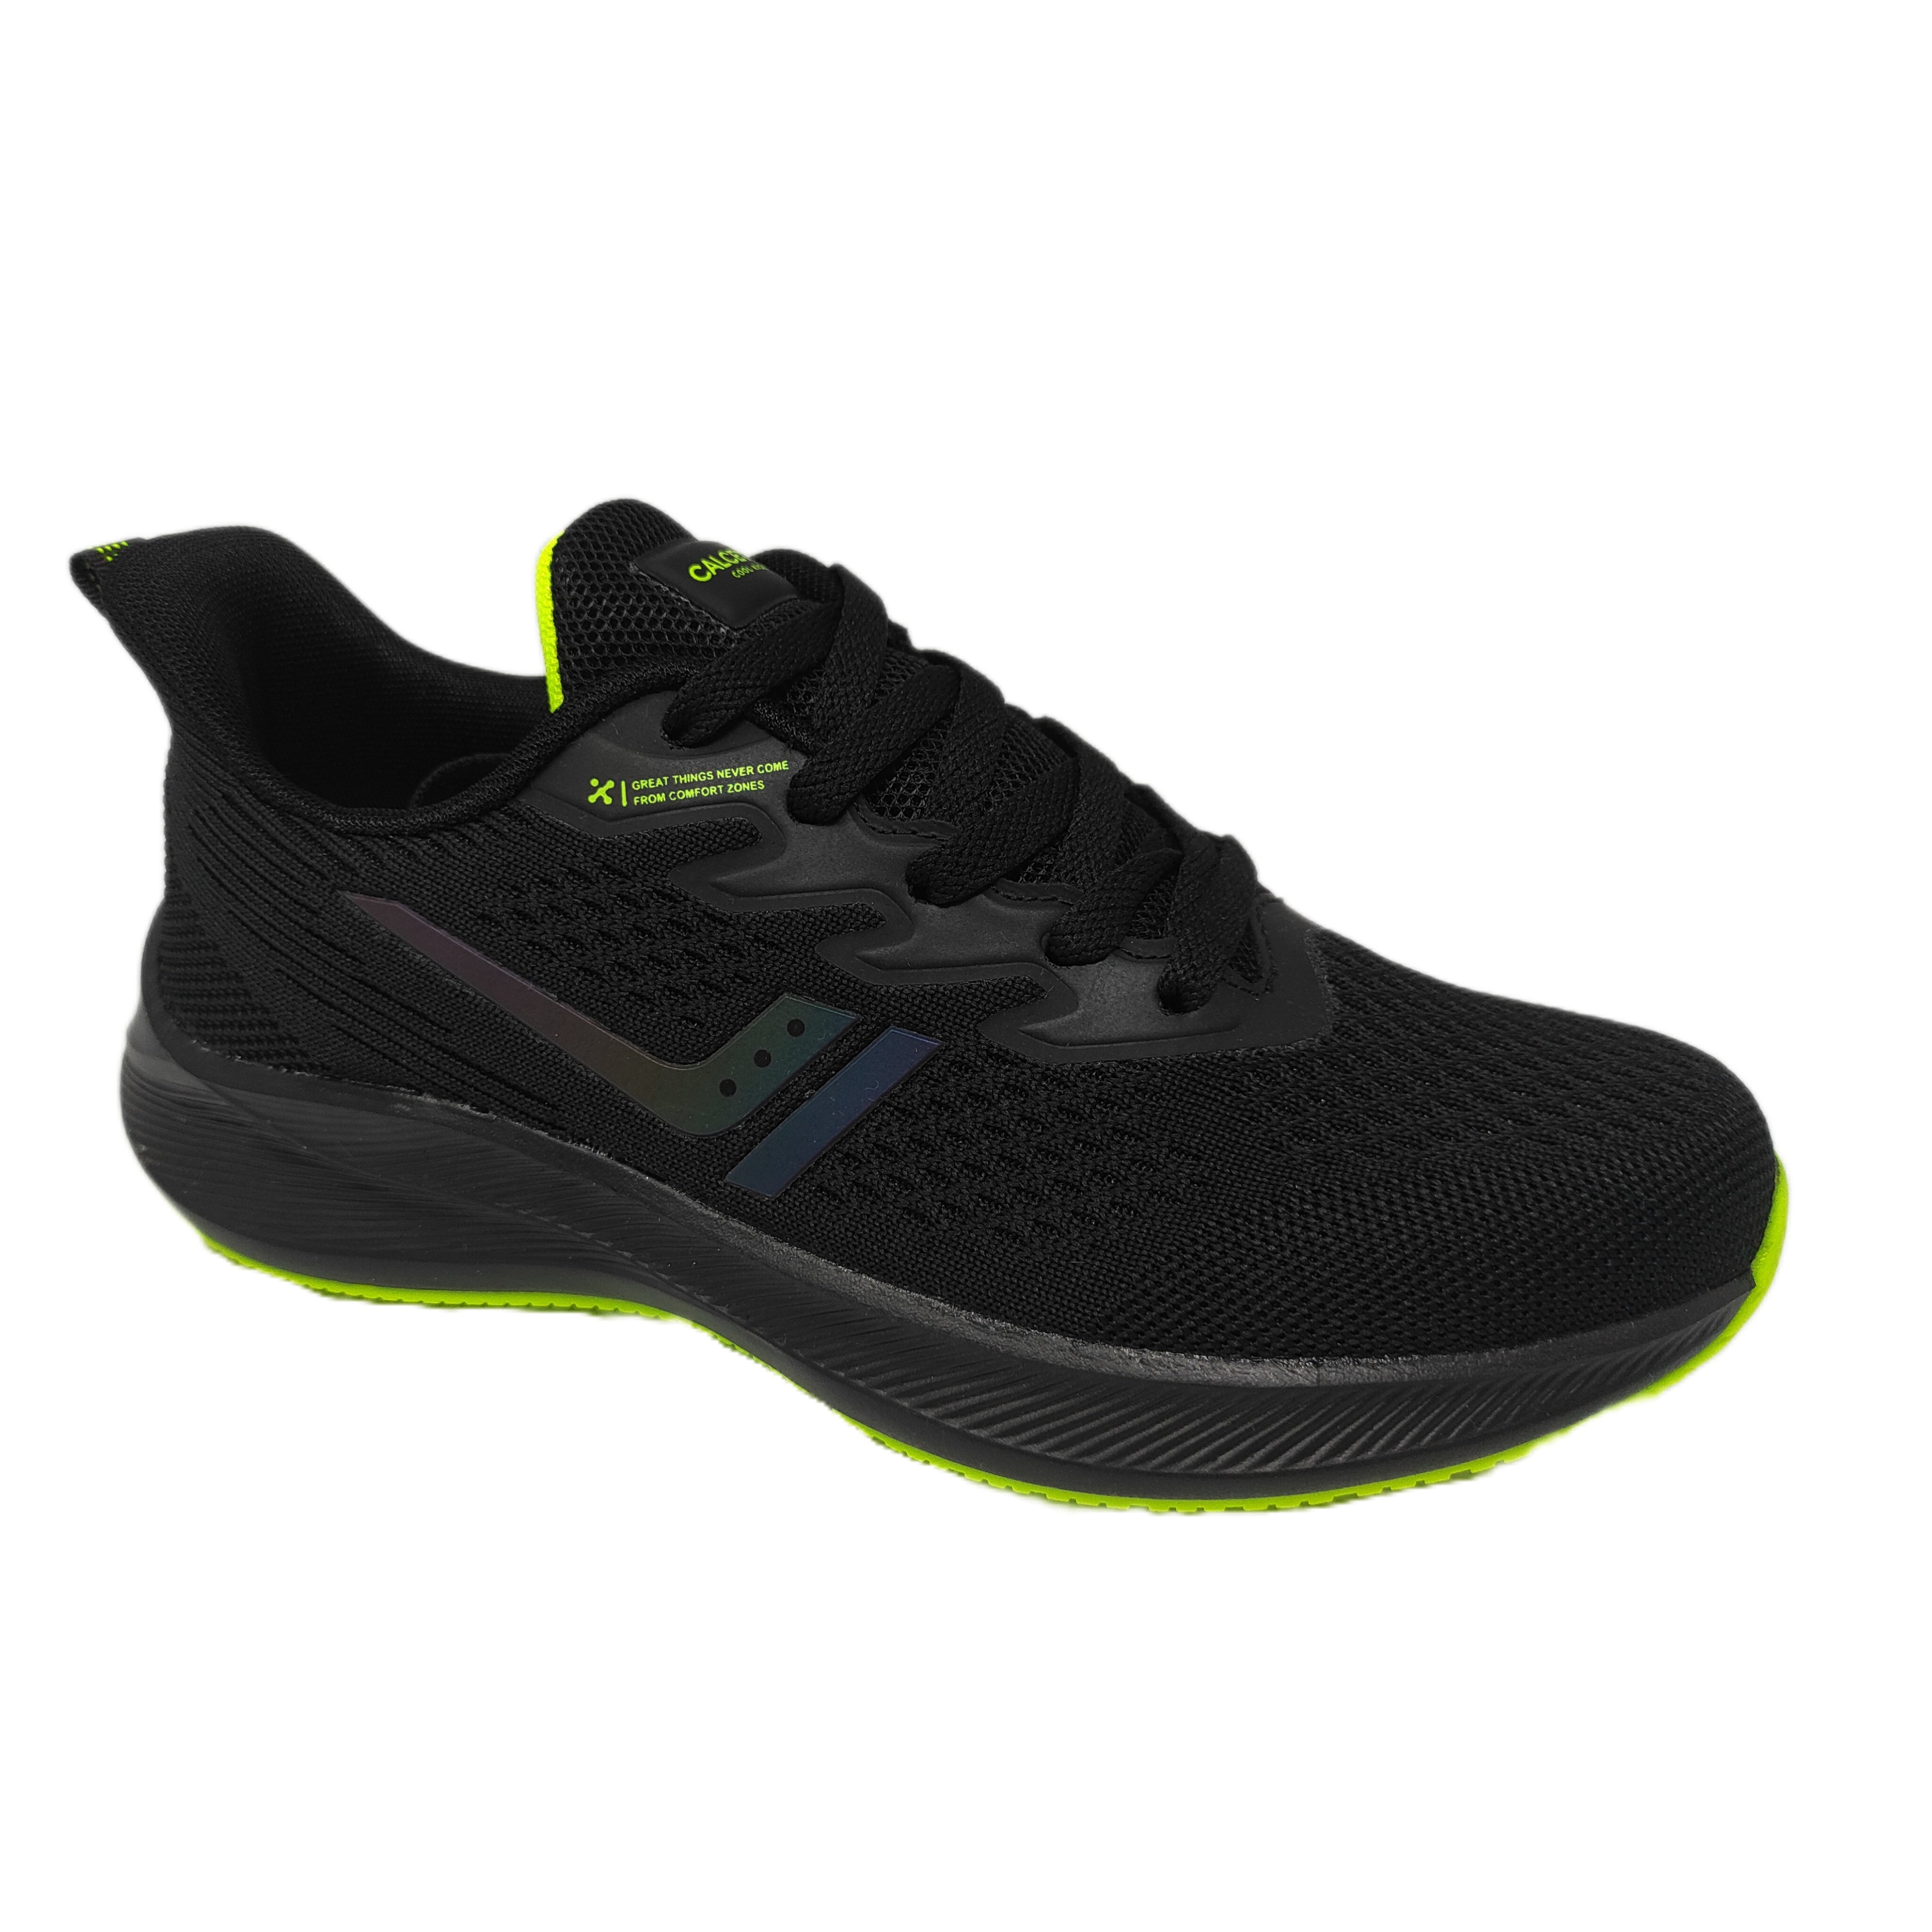 Calcetto CLT-0964 Black Lime Running Shoe For Men